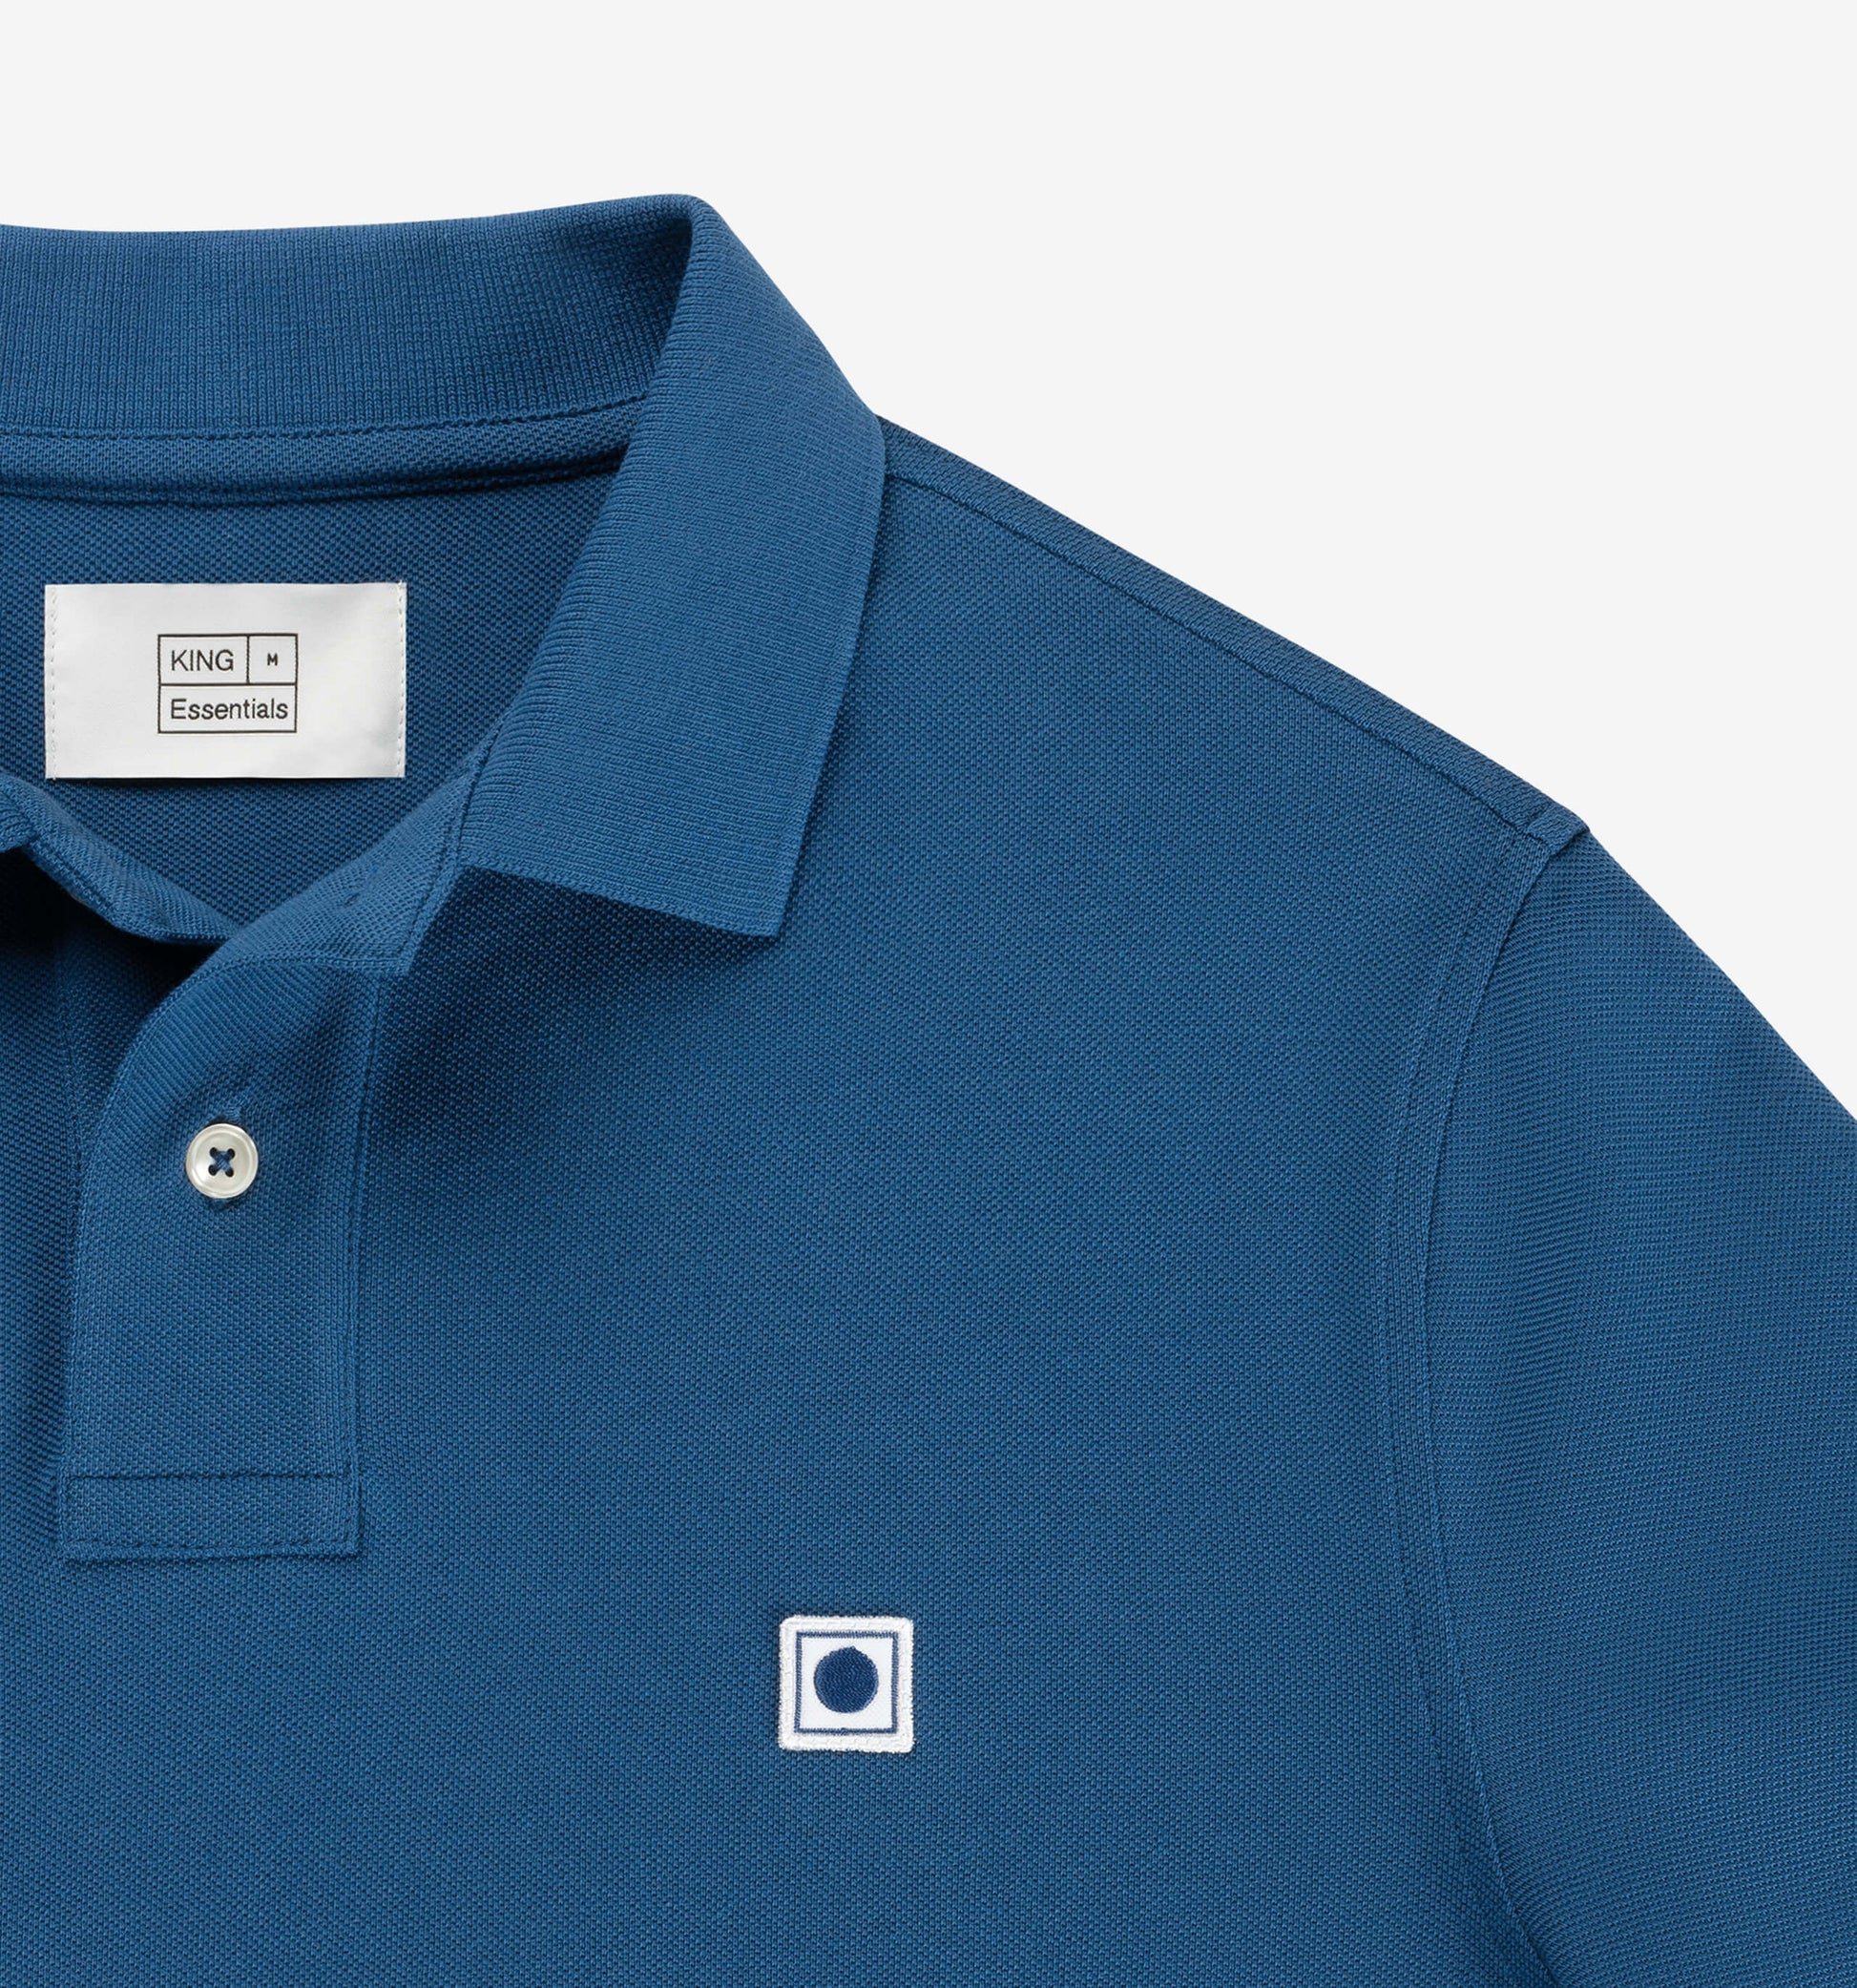 The Rene - Pique Polo In Royal Blue From King Essentials